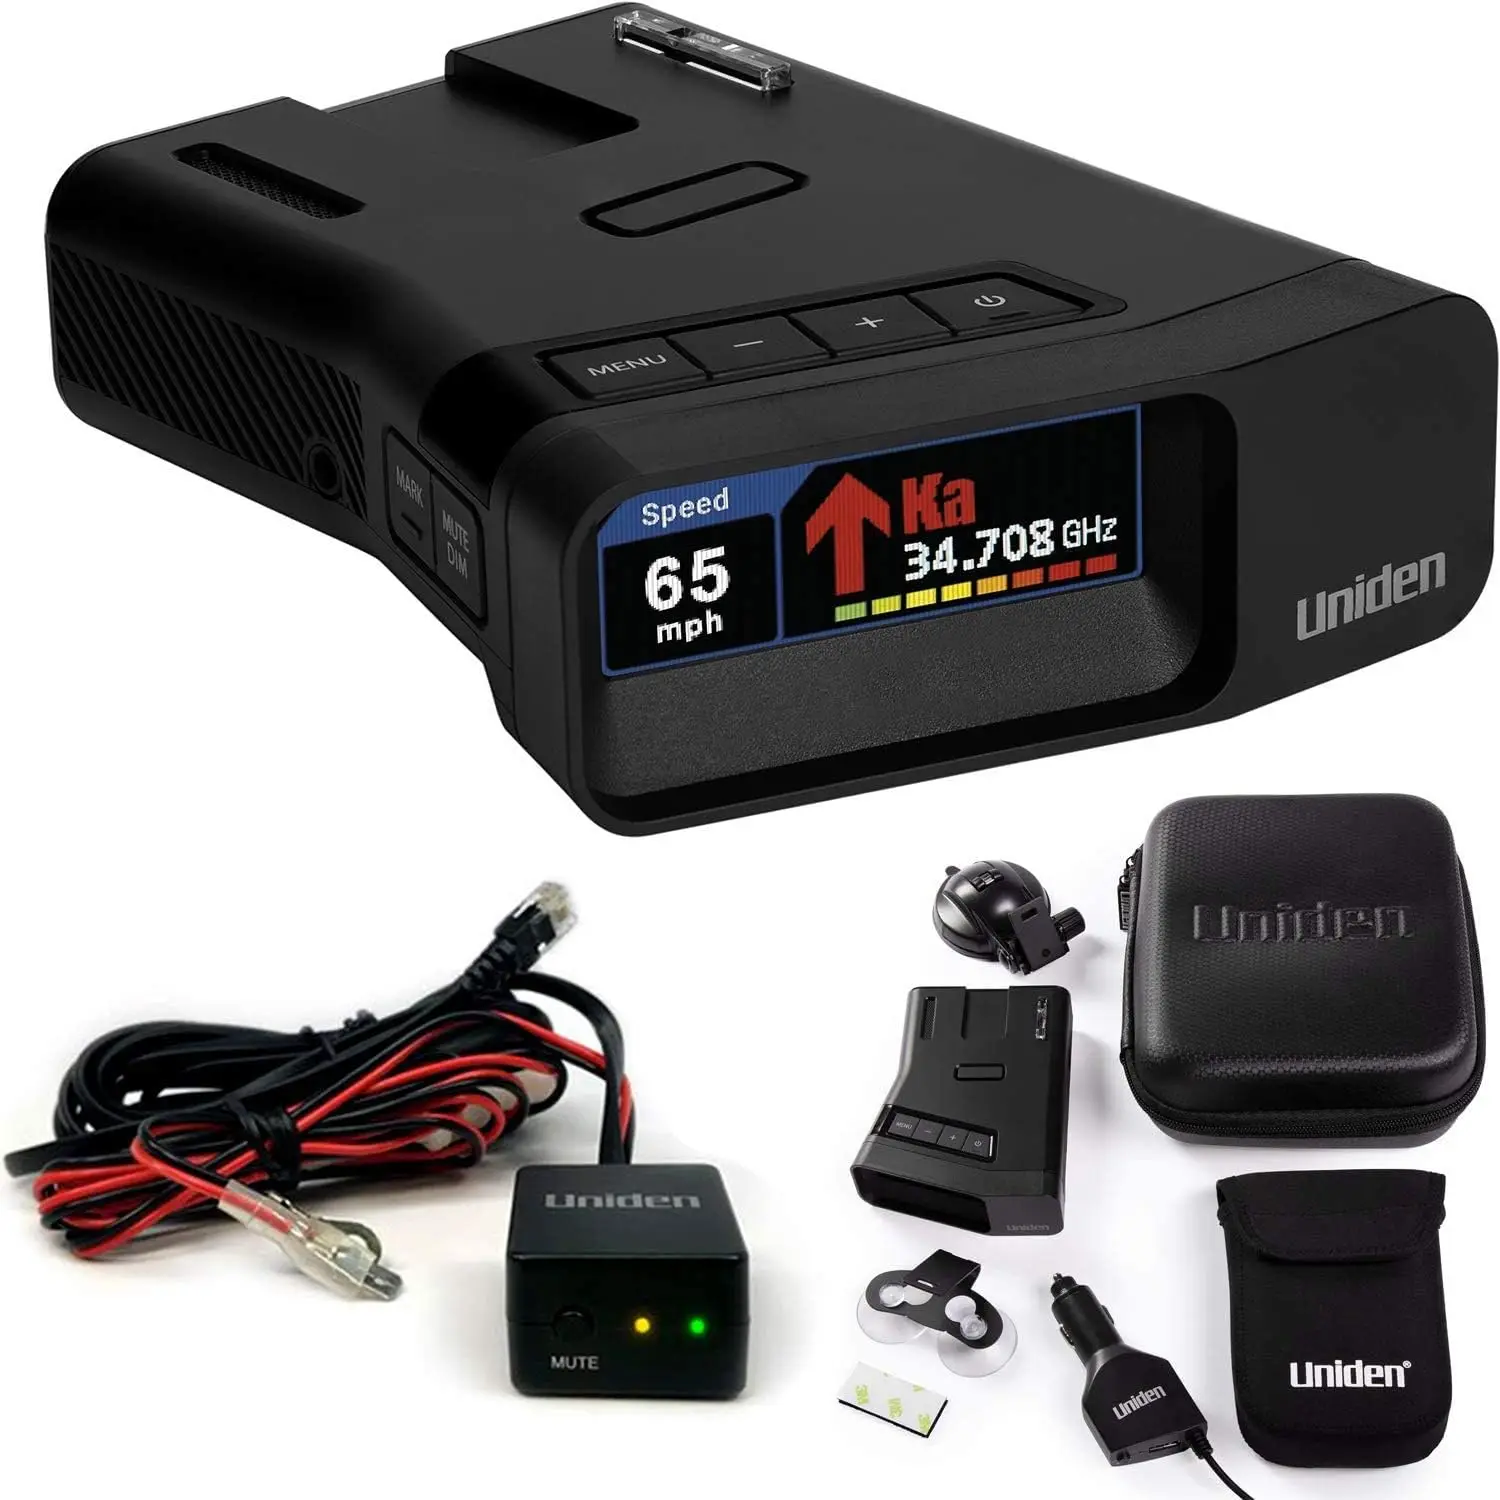 

Uniden R7 Extreme Long Range Laser/Radar Detector, Built-in GPS w/Real-Time Alerts, Dual-Antennas w/Directional Arrows